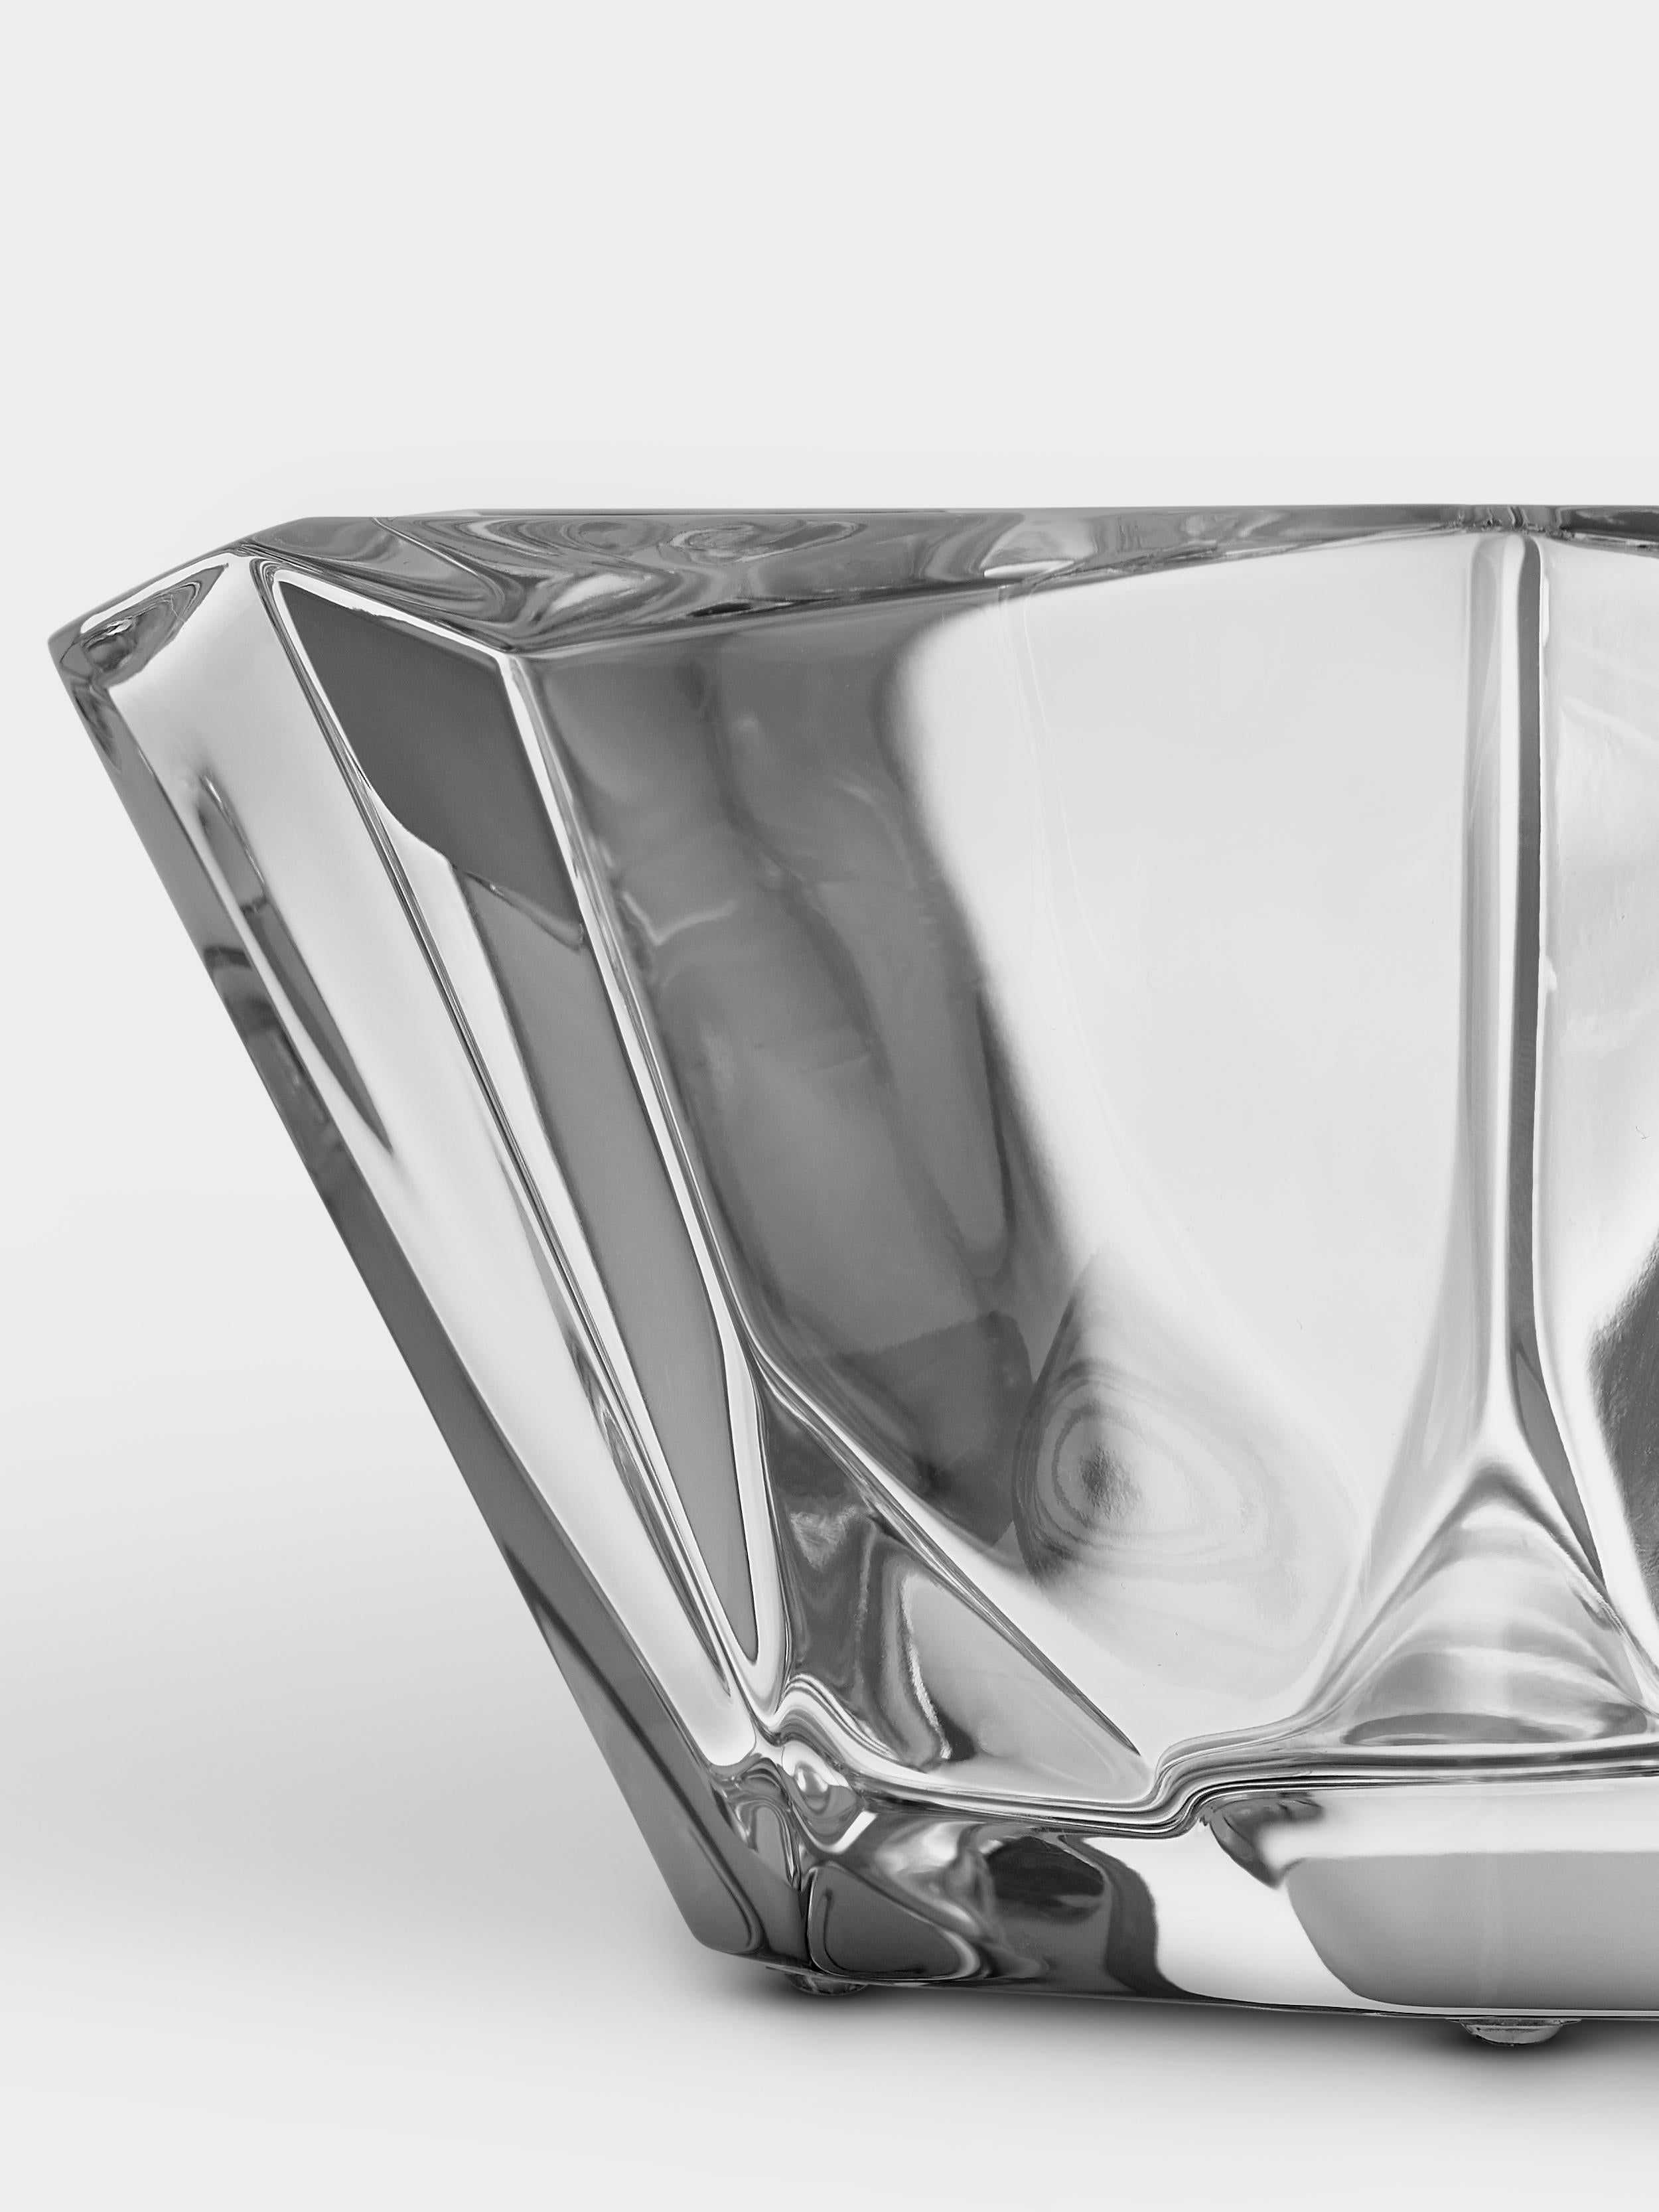 Precious Bowl from Orrefors has an asymmetrical design that beautifully refracts the light reflected in the thick crystal. The bowl is a decorative centerpiece delivering an elegant feel to the home. Designed by Malin Lindahl.
